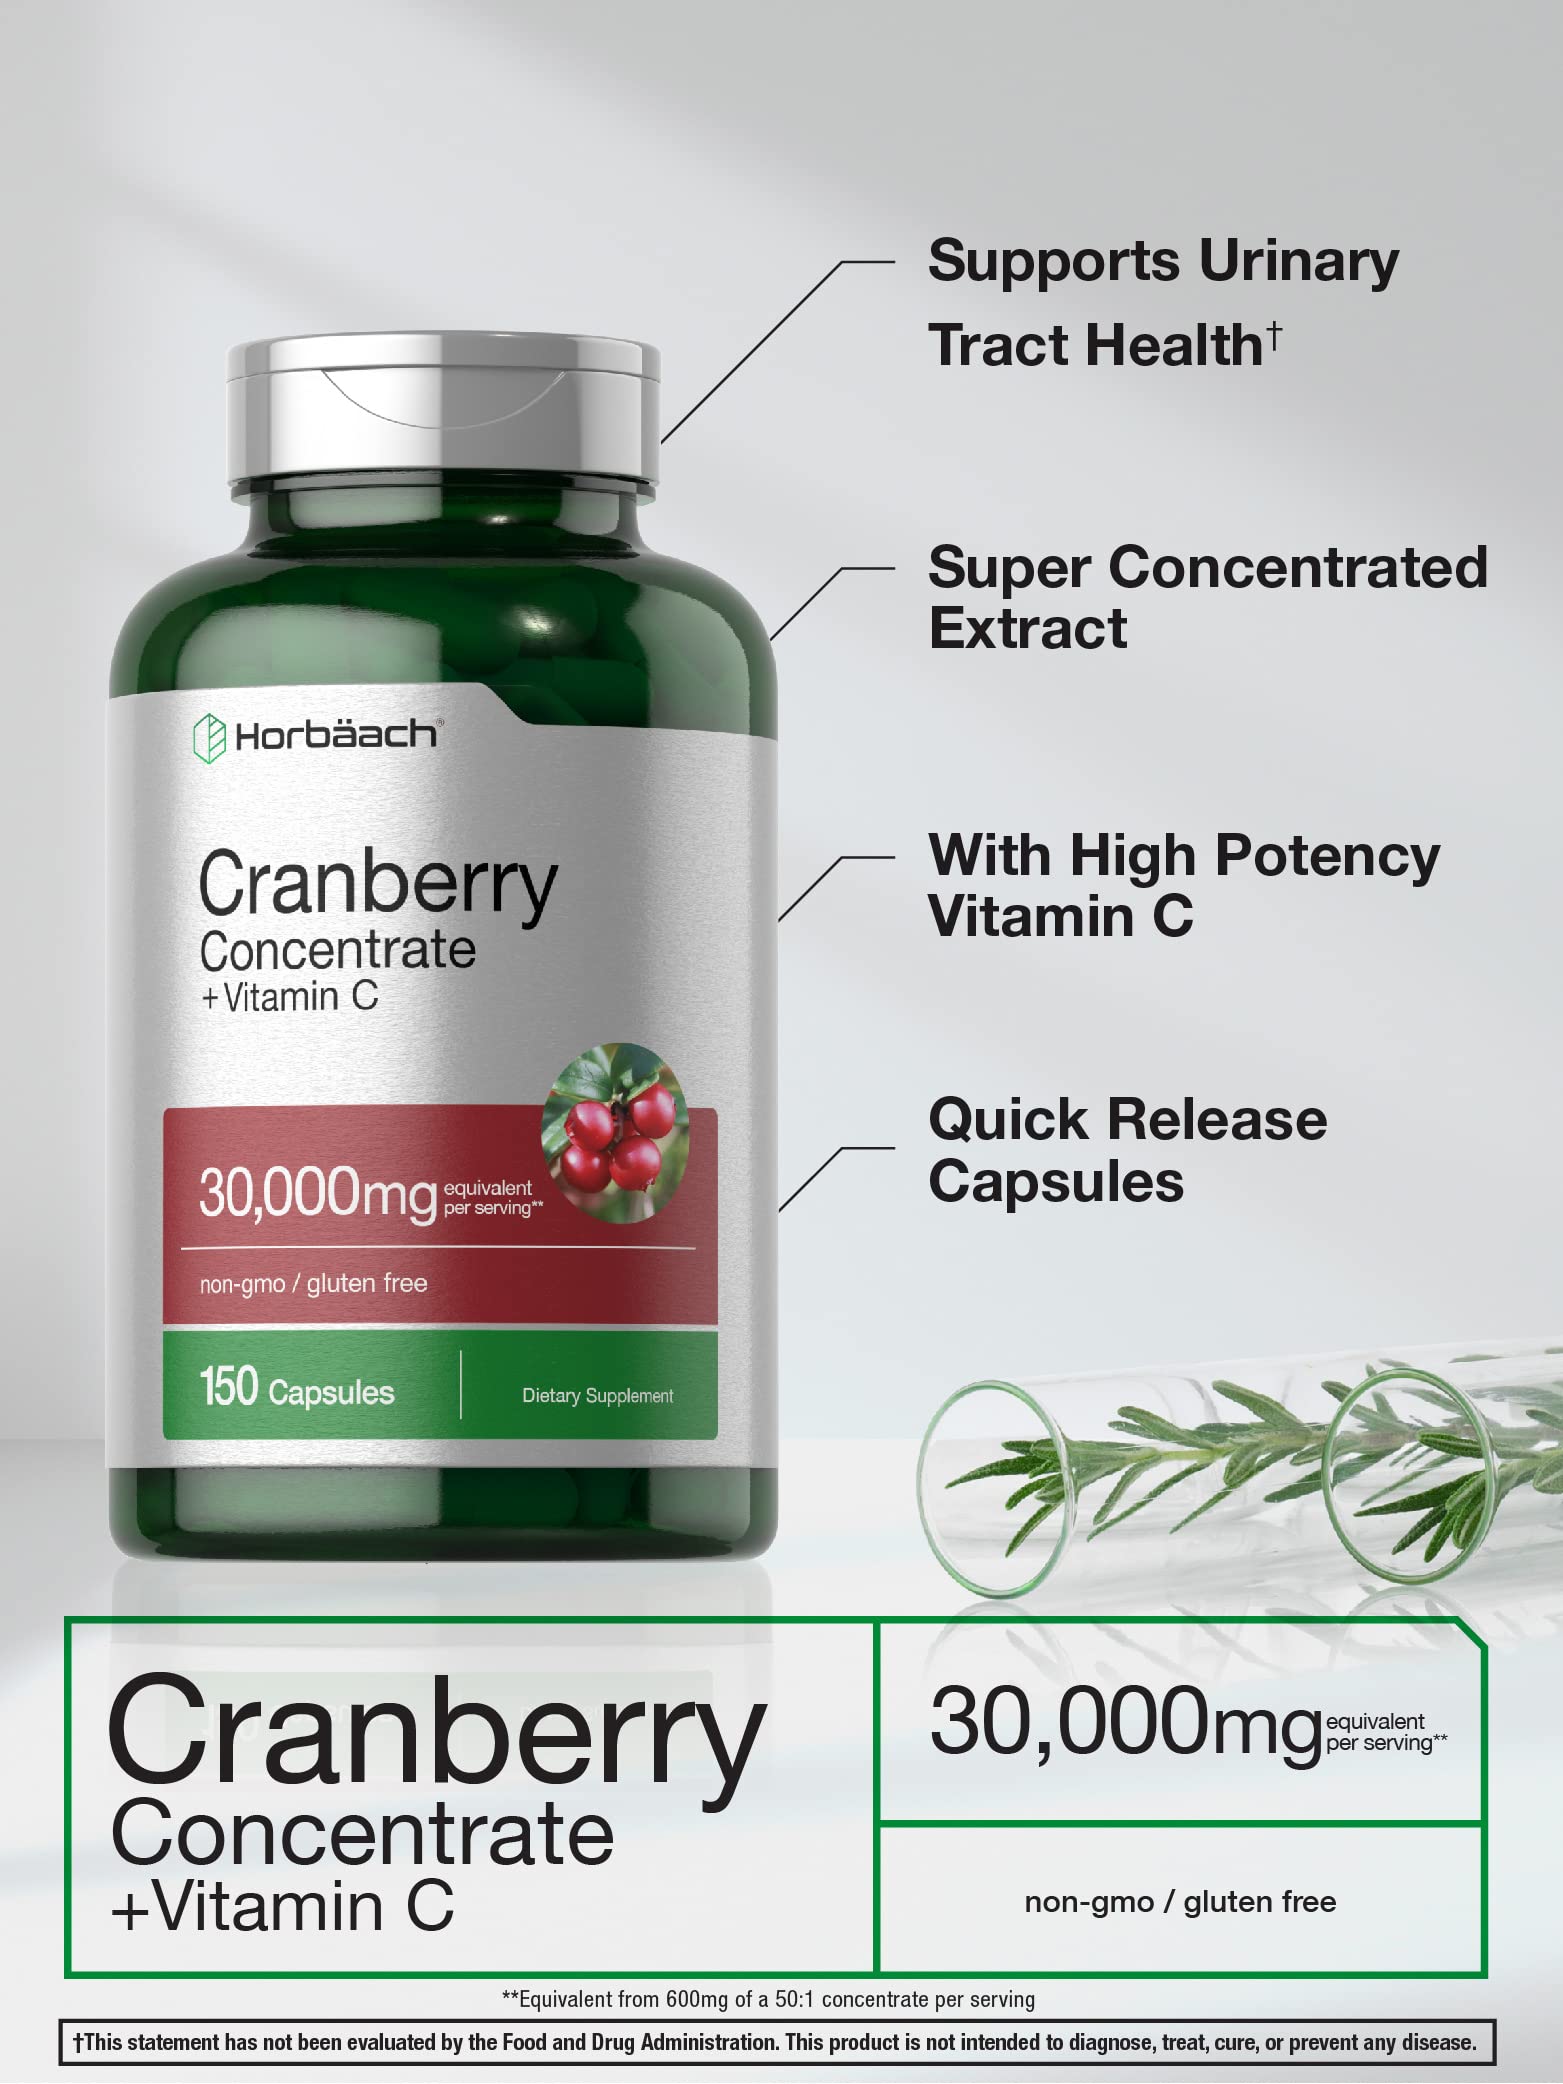 Cranberry Concentrate Extract + Vitamin C | 30,000mg | 150 Capsules | Triple Strength Ultimate Potency Formula | Non-GMO and Gluten Free Cranberry Pills Supplement | by Horbaach